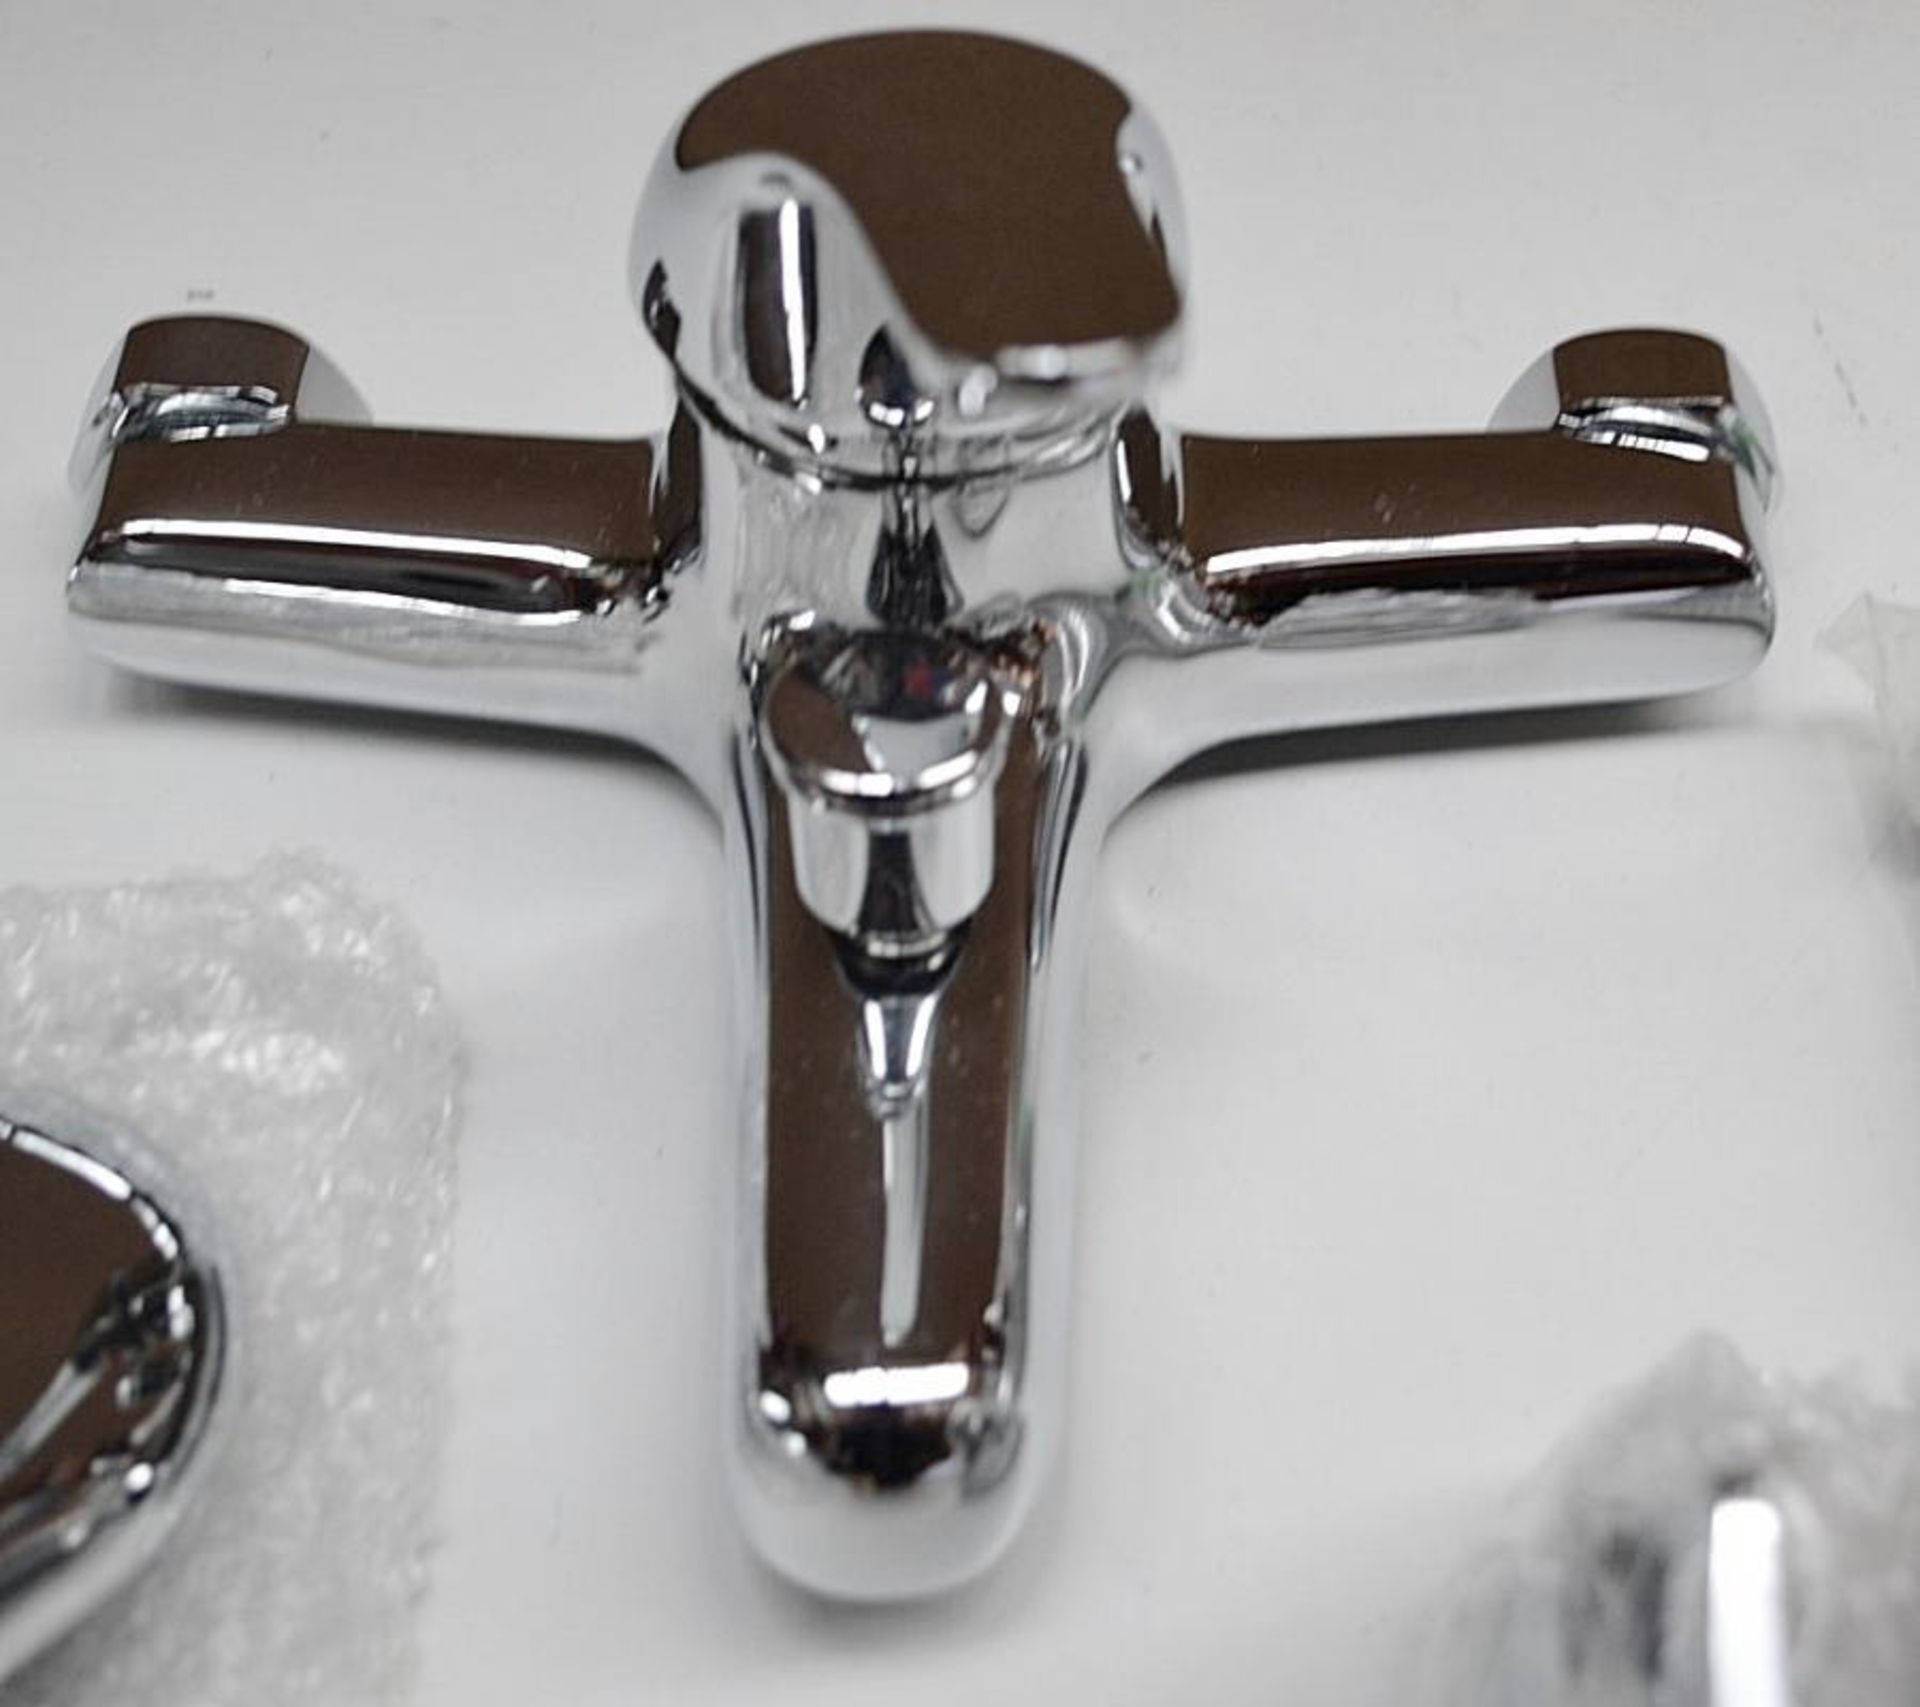 1 x PULSE Single Lever Bath Shower Mixer Tap In Chrome (Model: 112G2) - Ref: M188 - CL190 - Unused B - Image 5 of 7